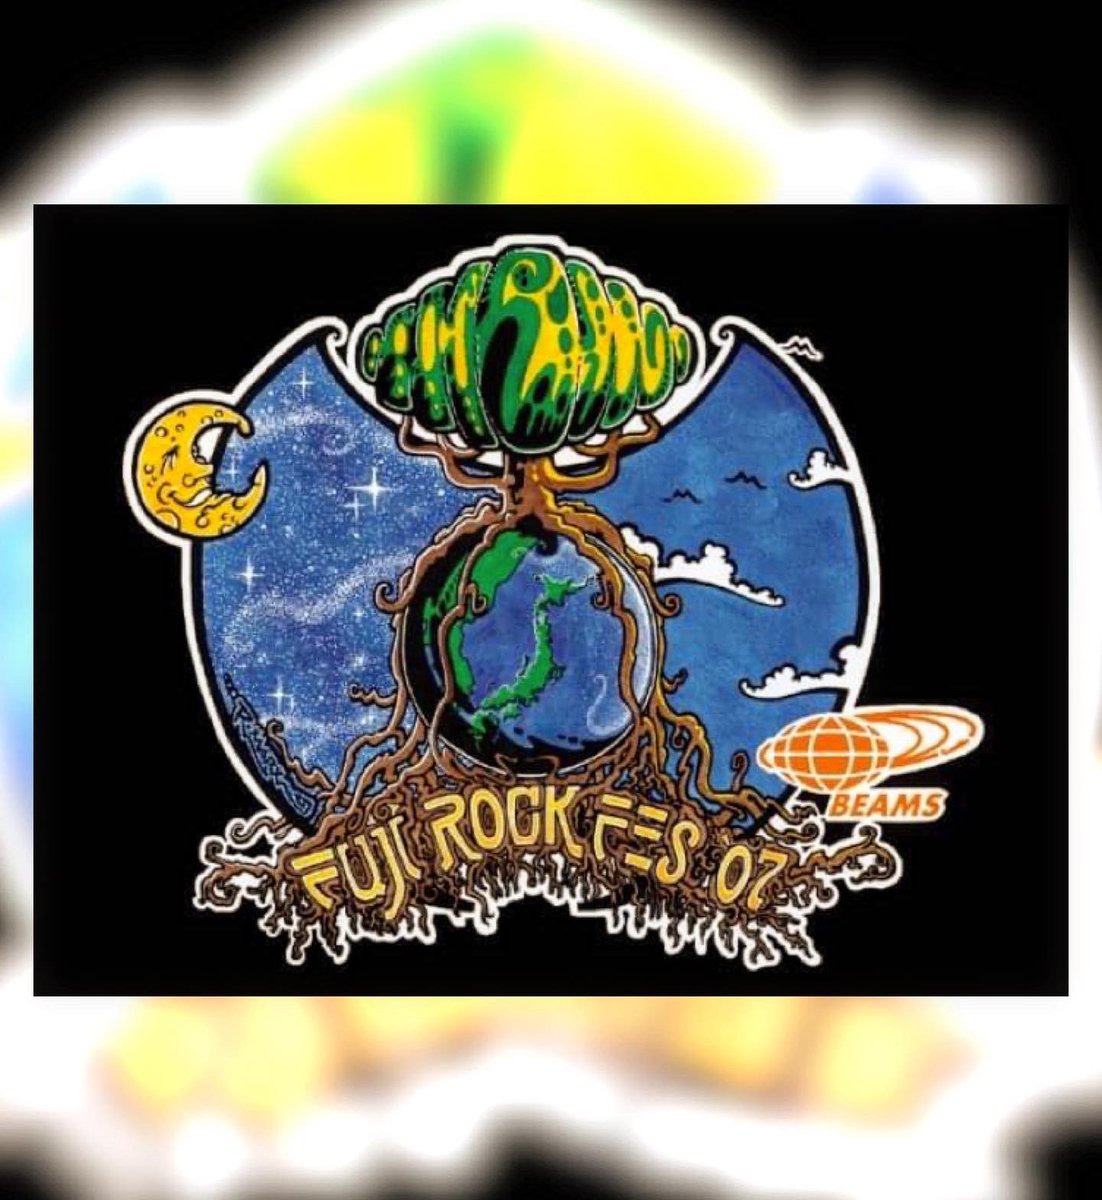 From the #Archive ✨
the Fuji Rock fest tees
#Japan in 07’

it was such an honor to be able to create this one ~ had a great playful time bringing it all together

#artist #rmarx #gigart #Fuji #festival #treeoflife #moonlight #liveit #loveit #artlife #getsome 

   EnJoY
💕🌞💕